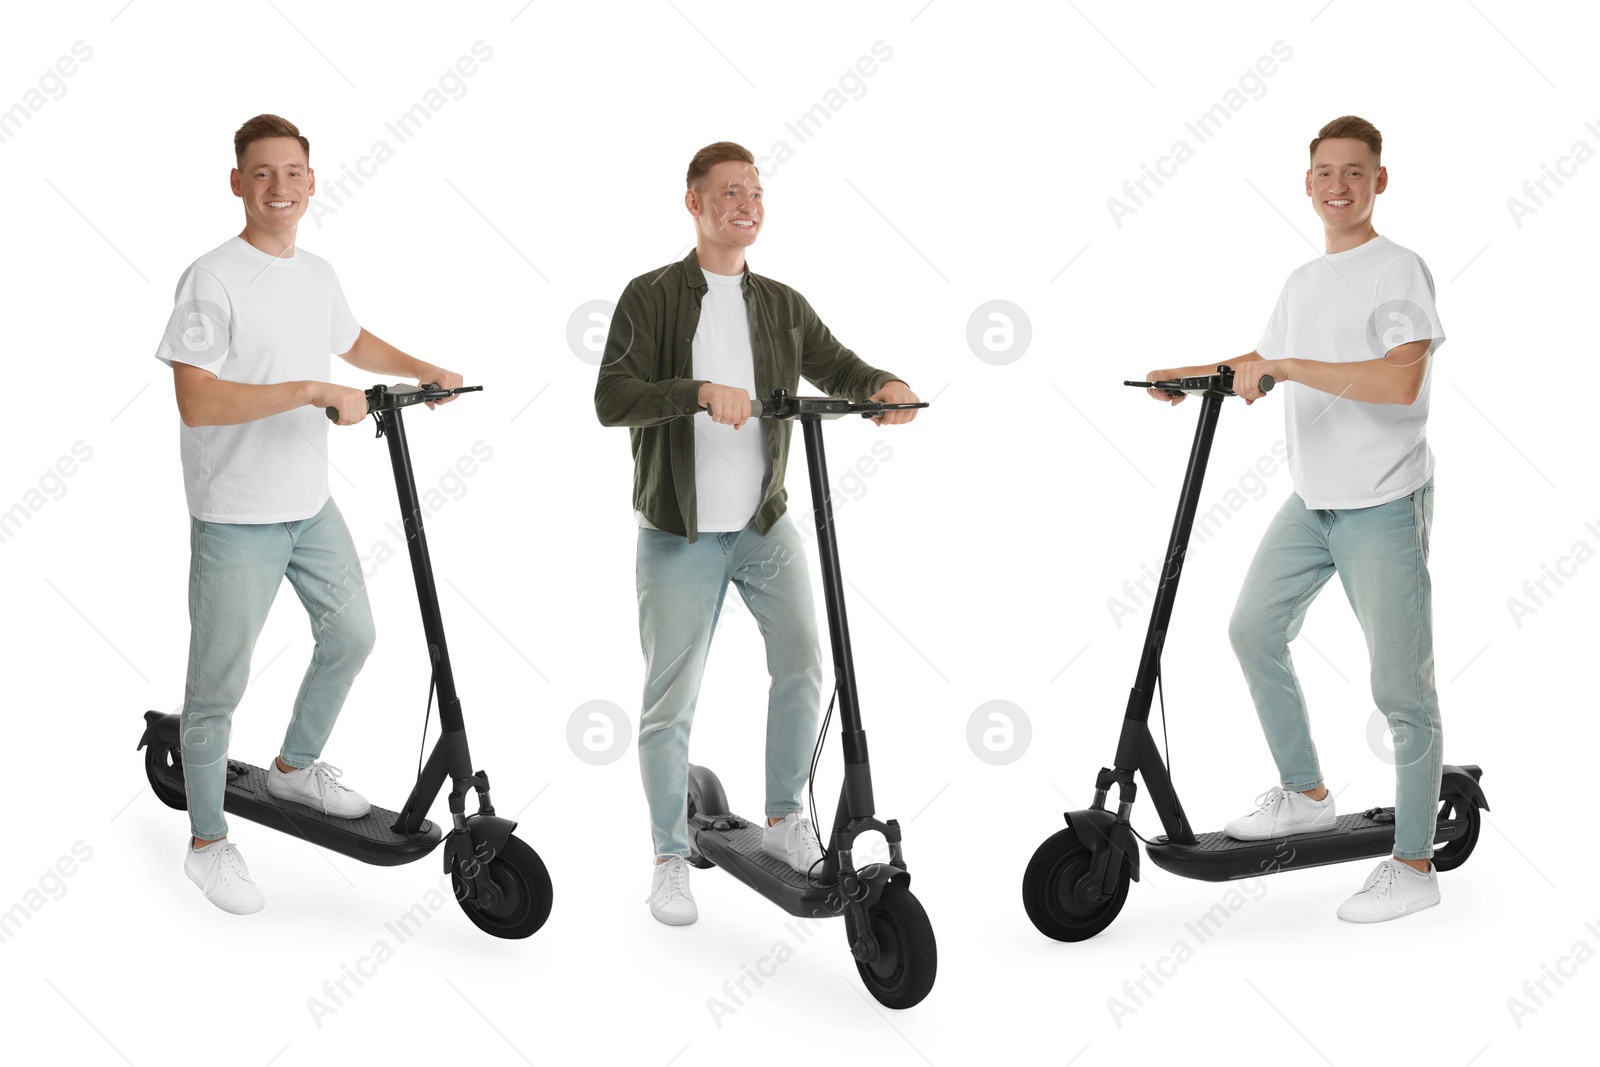 Image of Man with electric kick scooter isolated on white. Set of photos